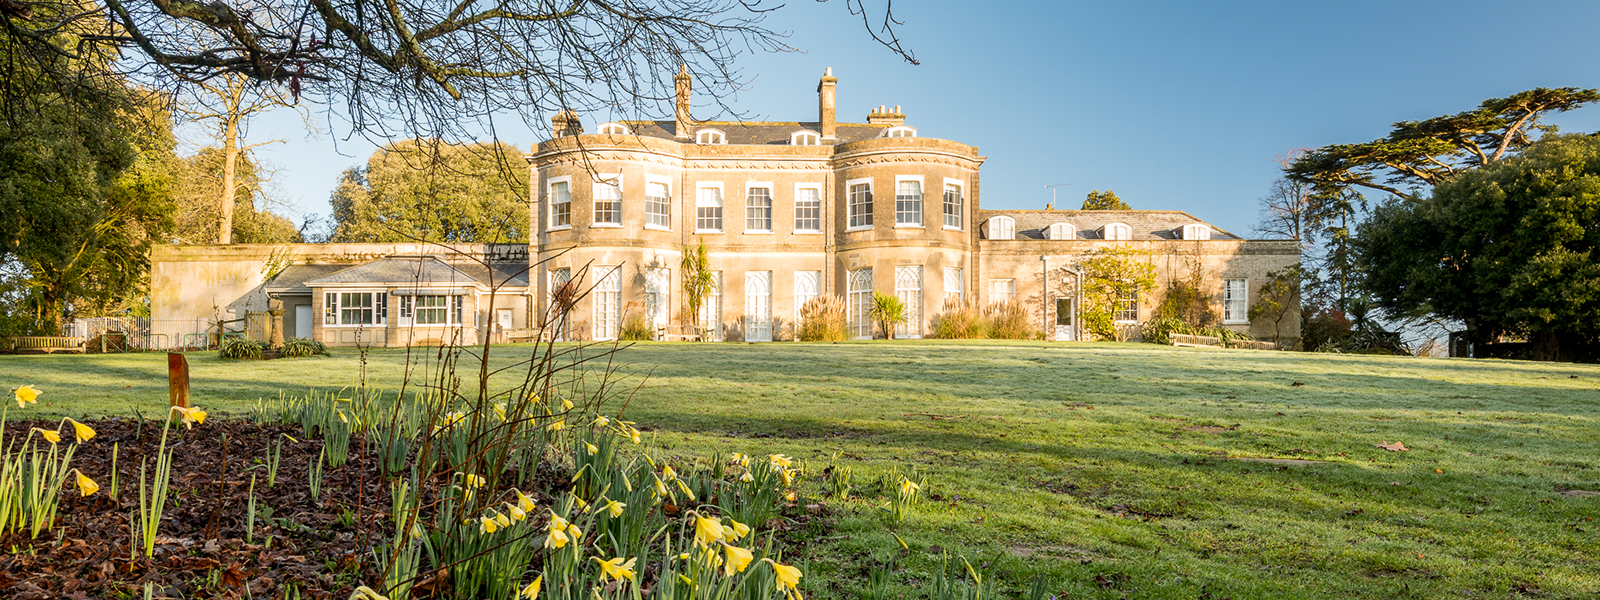 South side of Upton House with daffodils